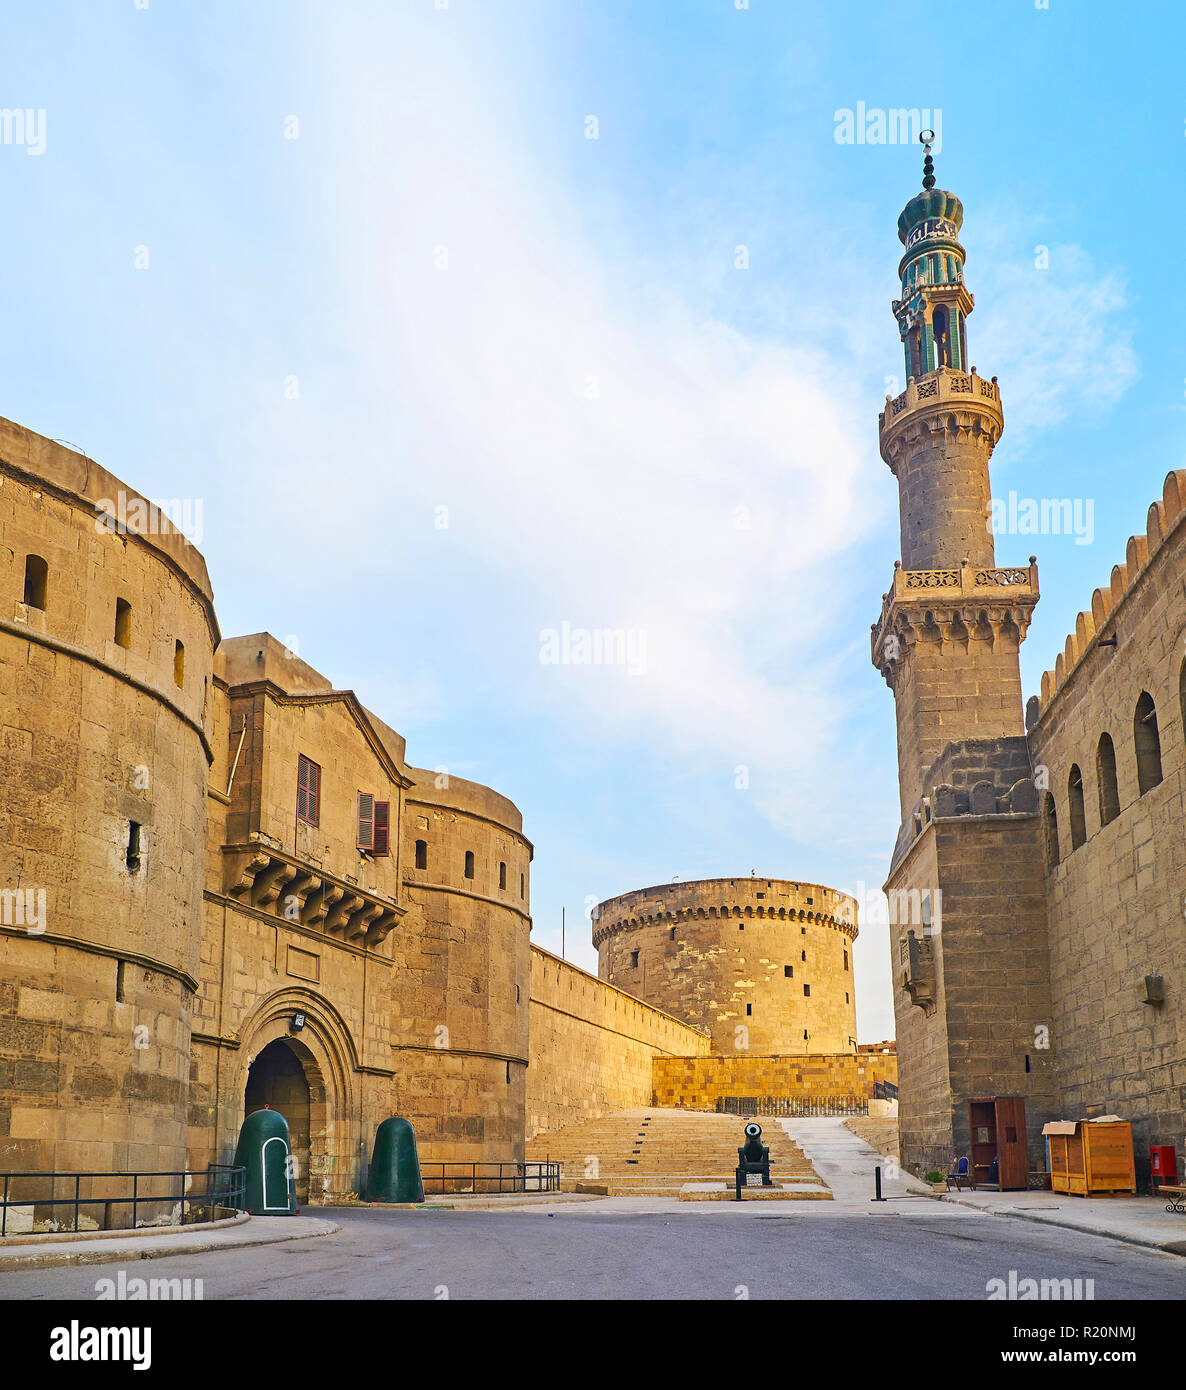 The entrance gate of Military Museum of Saladin Citadel neighbors with the tall carved minaret of Al-Nasir Muhammad Mosque, Cairo, Egypt. Stock Photo